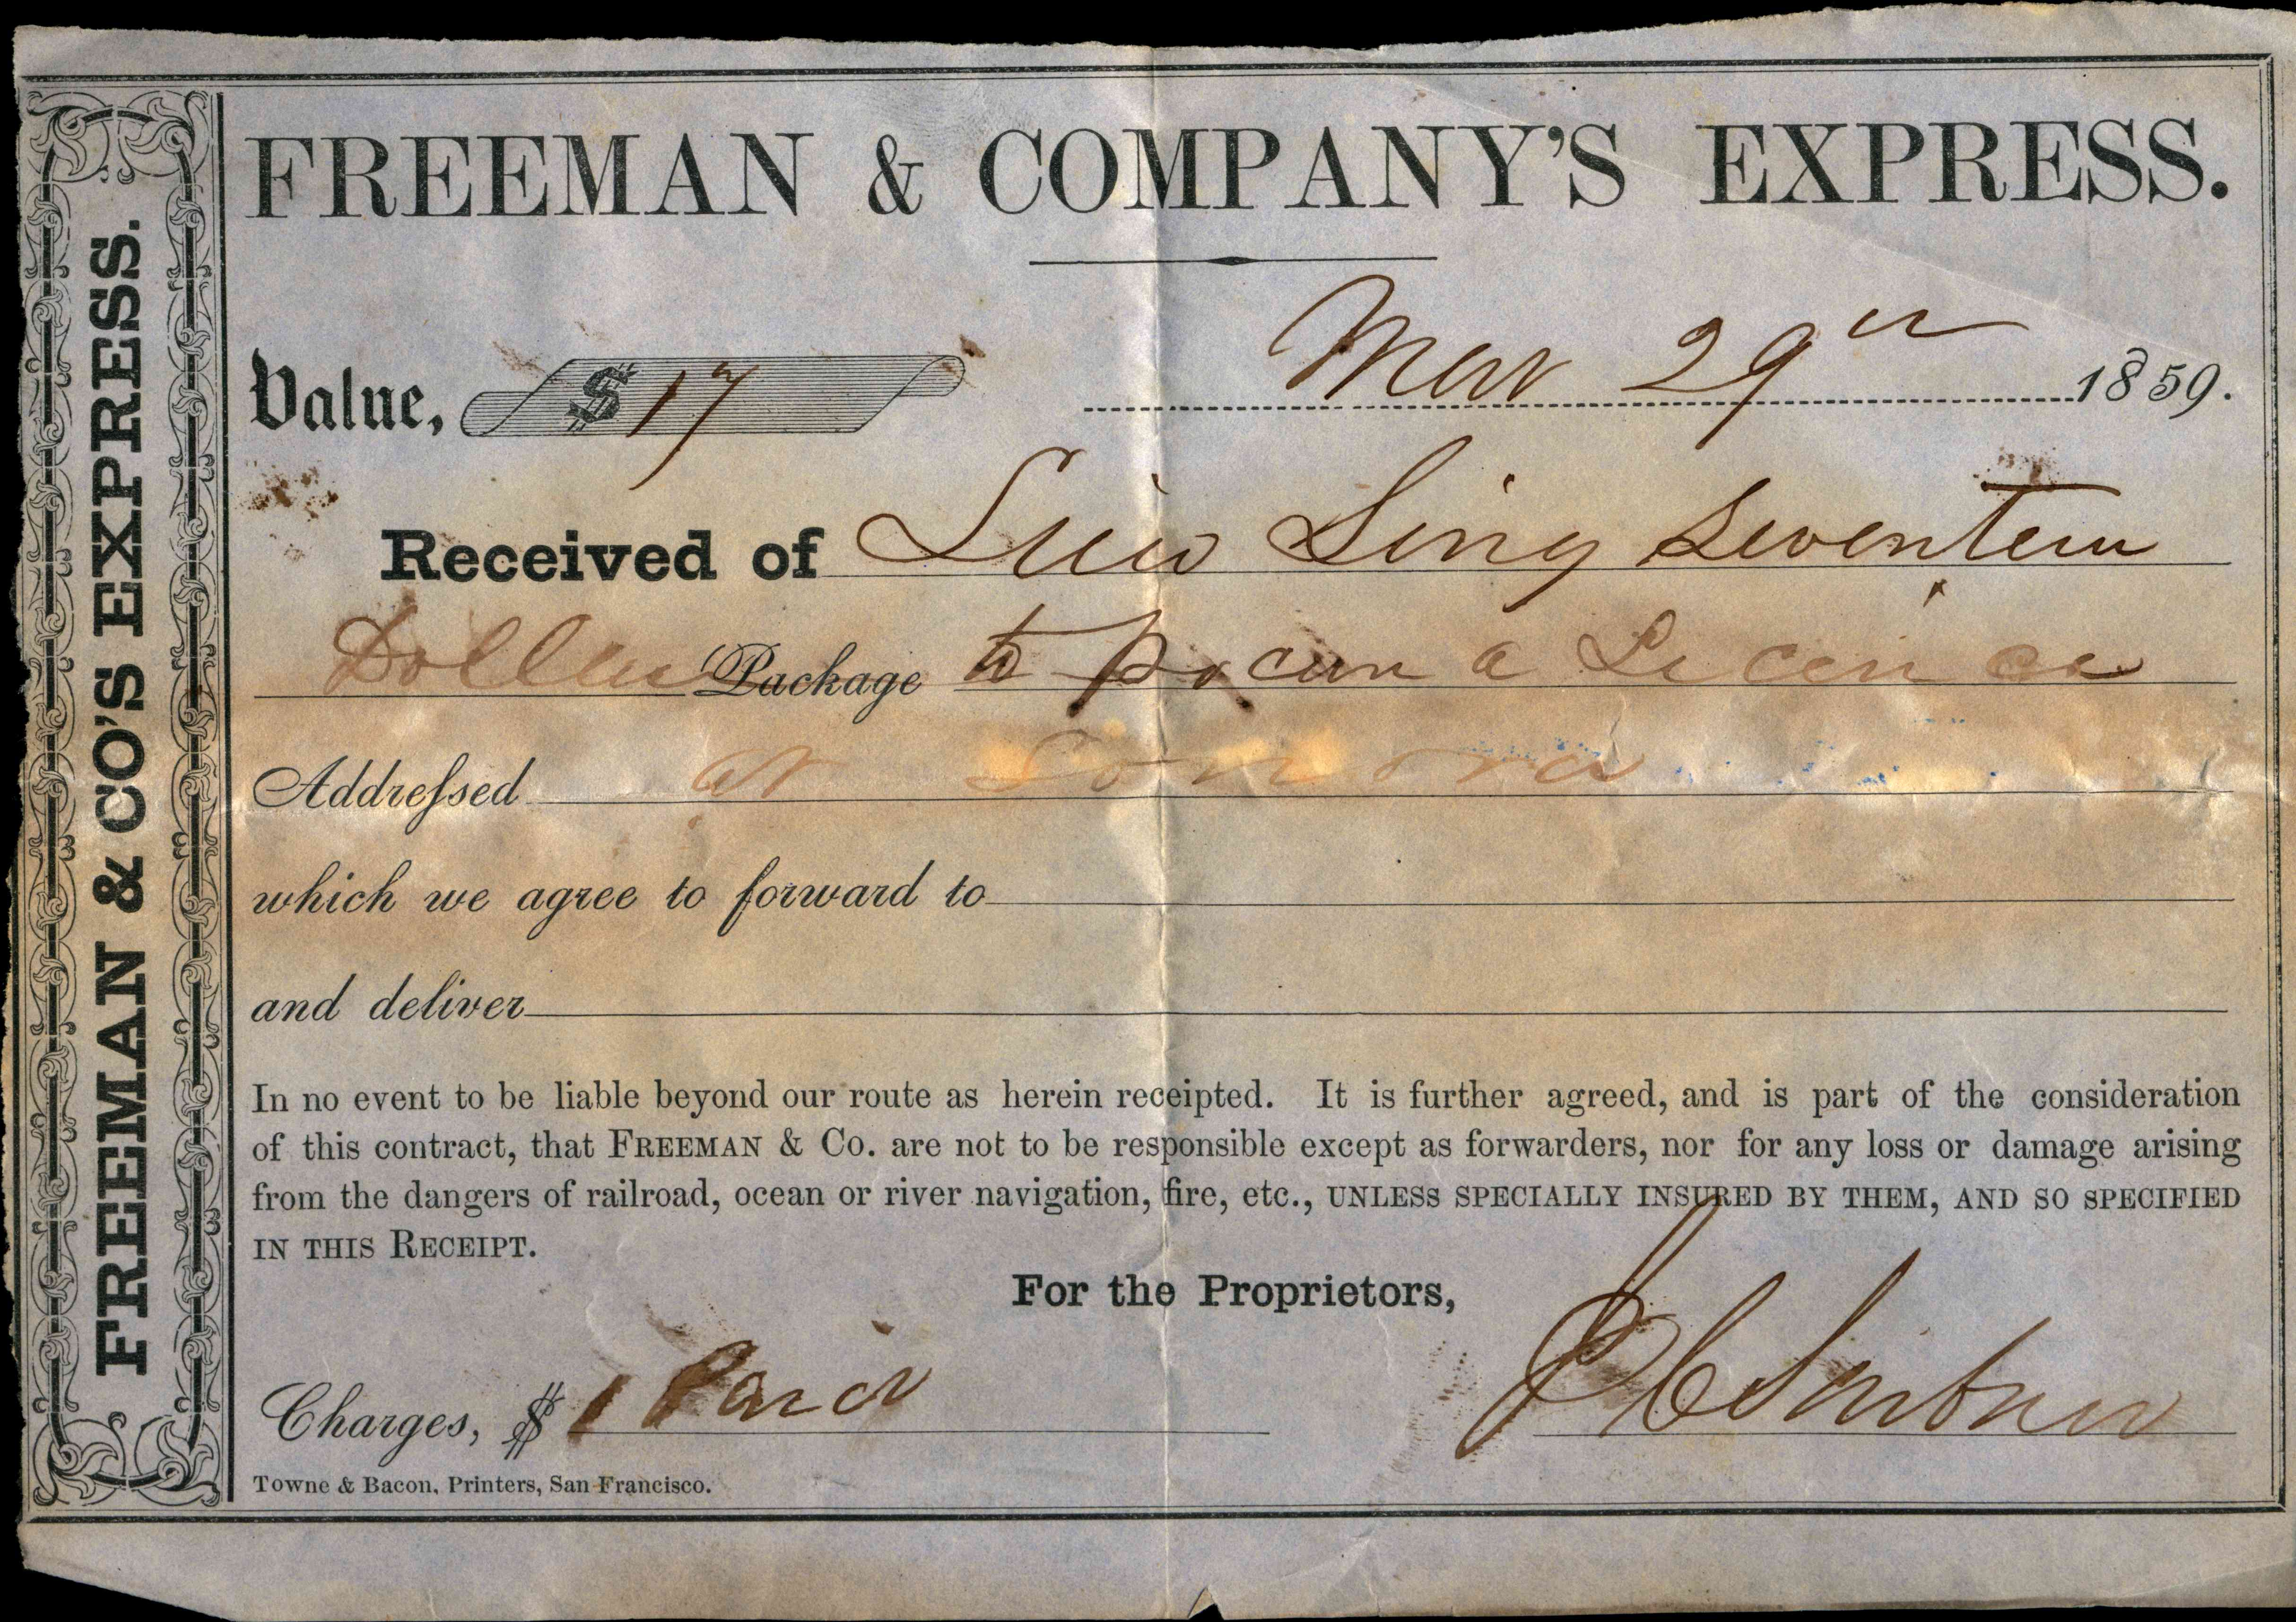 Freeman & Company's Express Receipt for a package